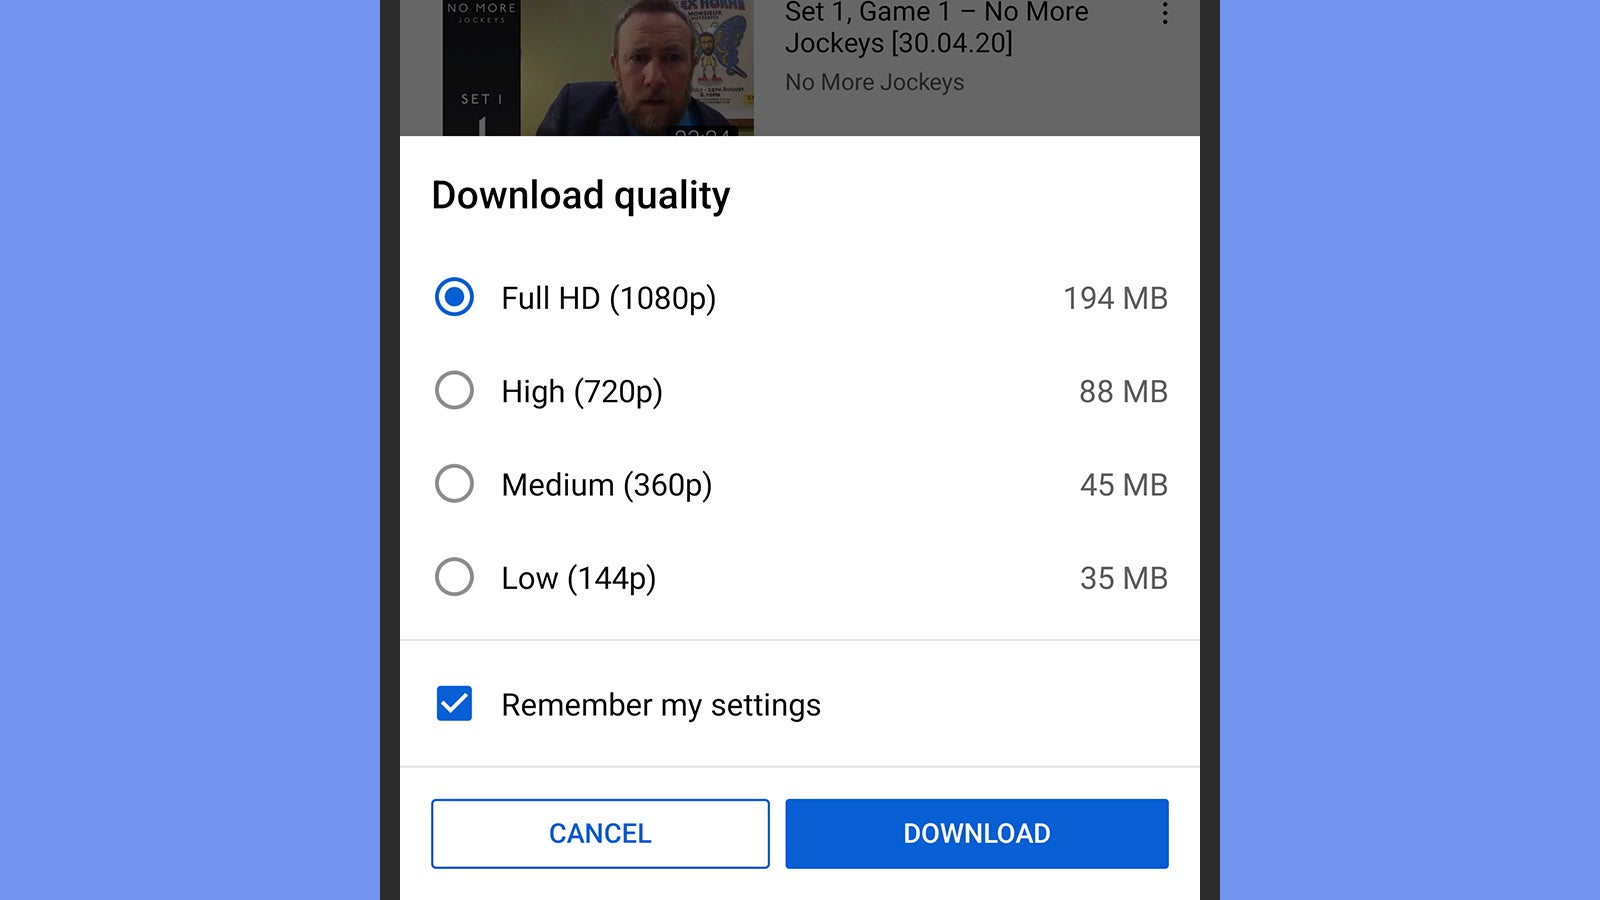 You can choose clip quality every time you download a video, if you need to. (Screenshot: YouTube)